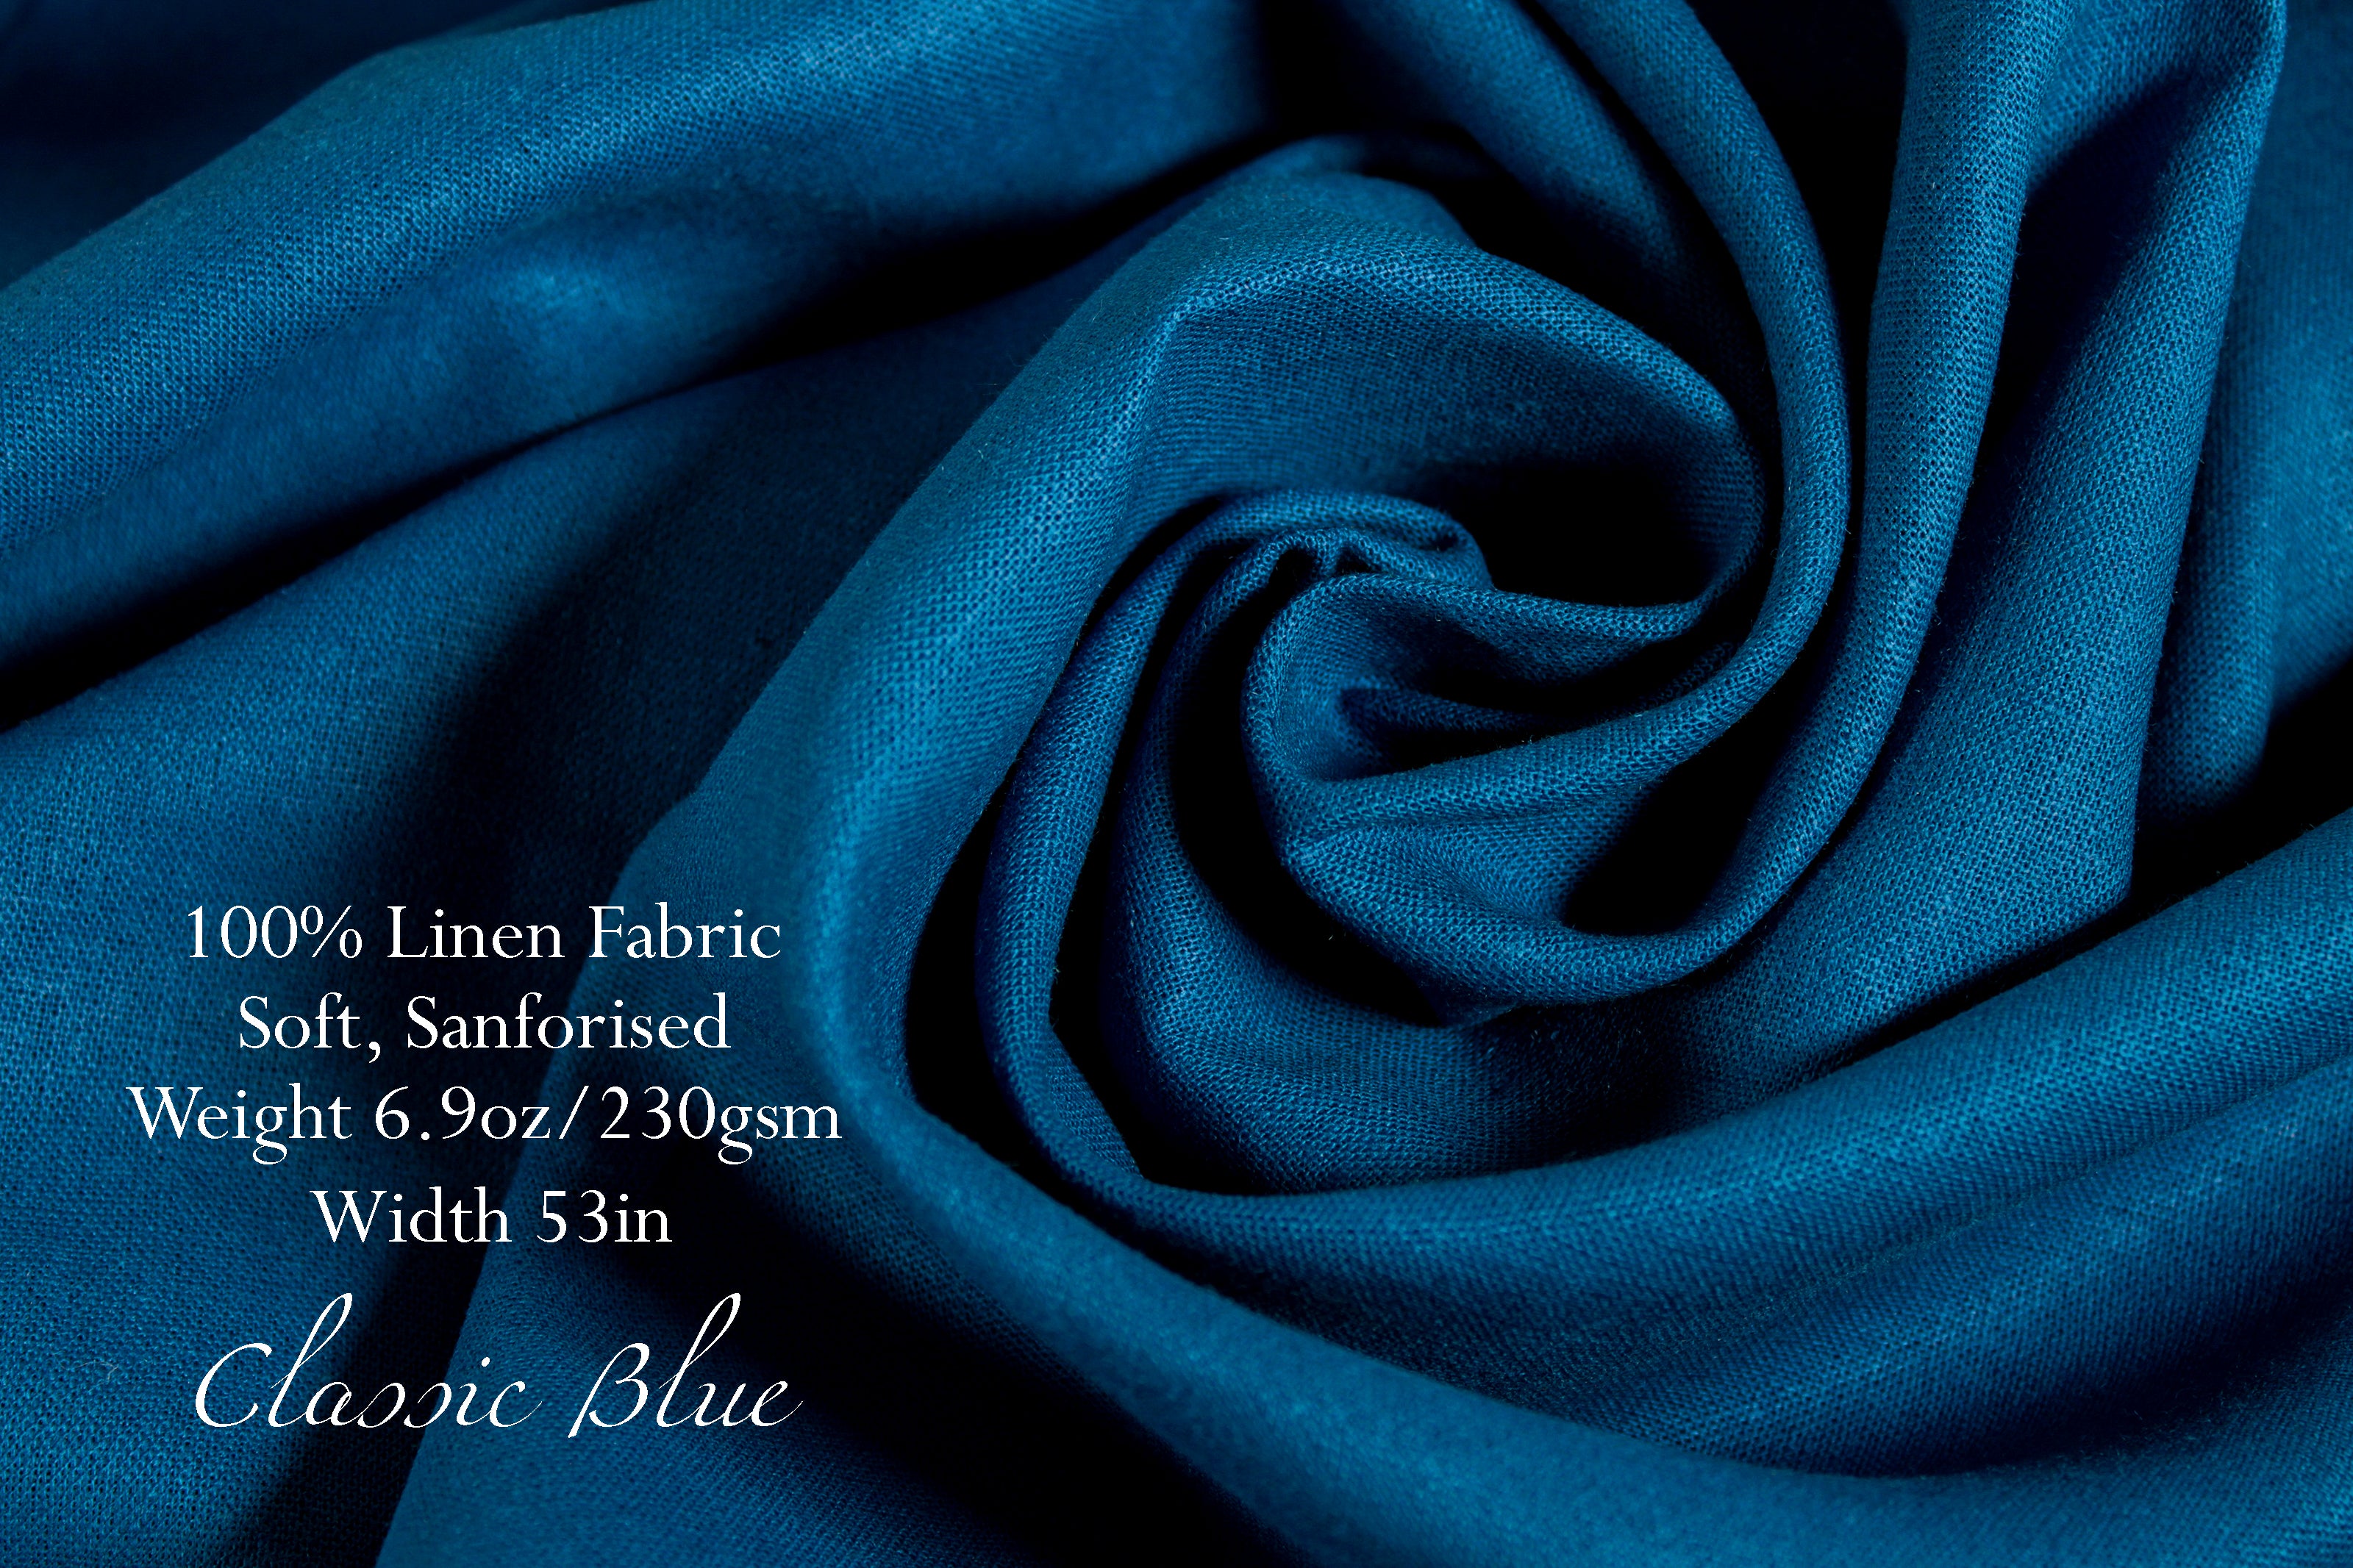 NEW LINEN FABRIC COLLECTION!!! / 100% Linen Fabric by the Yard / Classic blue Linen Fabric / Buy Linen Online